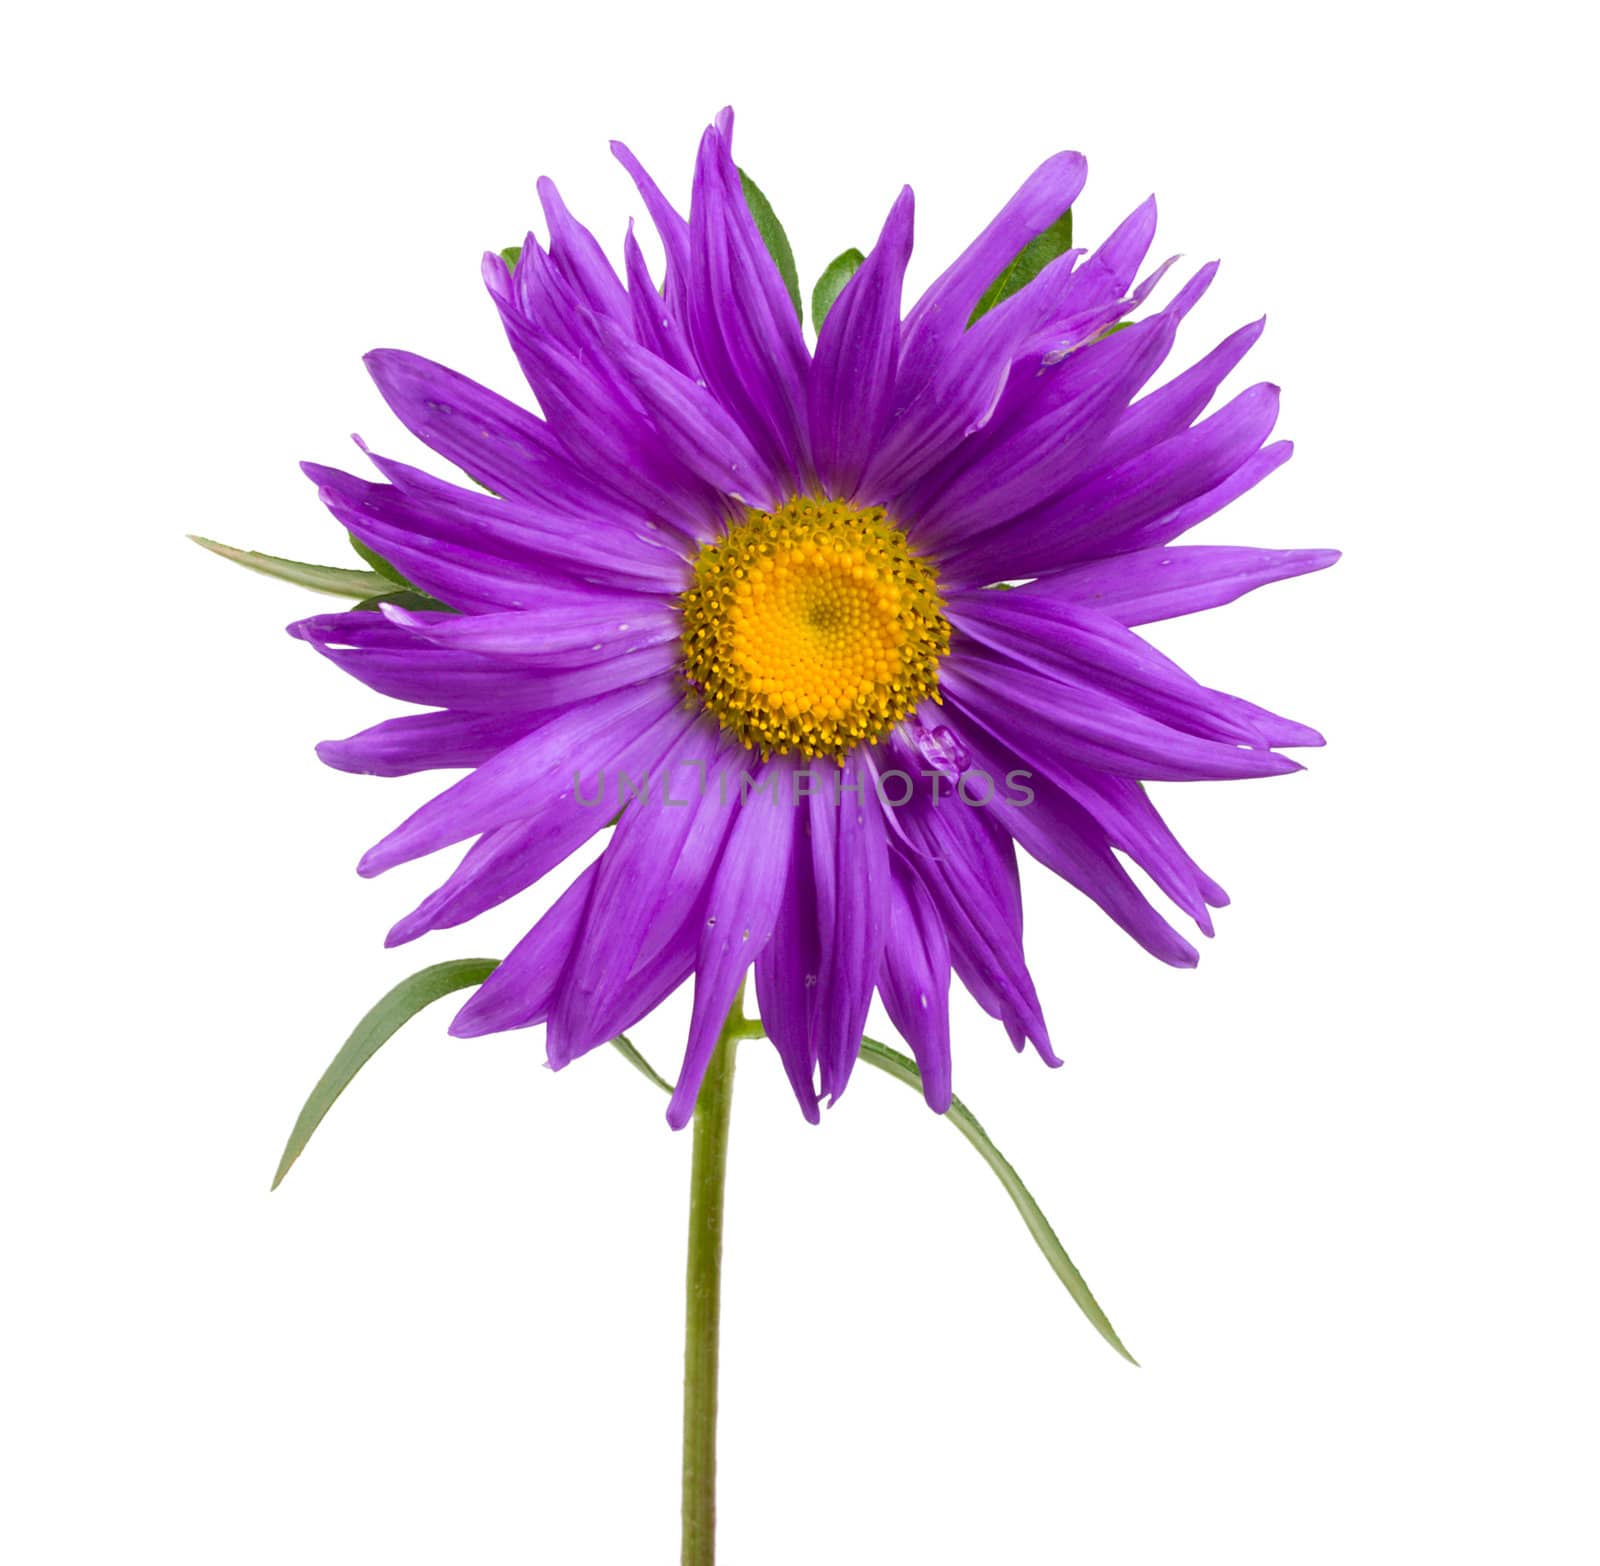 close-up violet aster, isolated on white